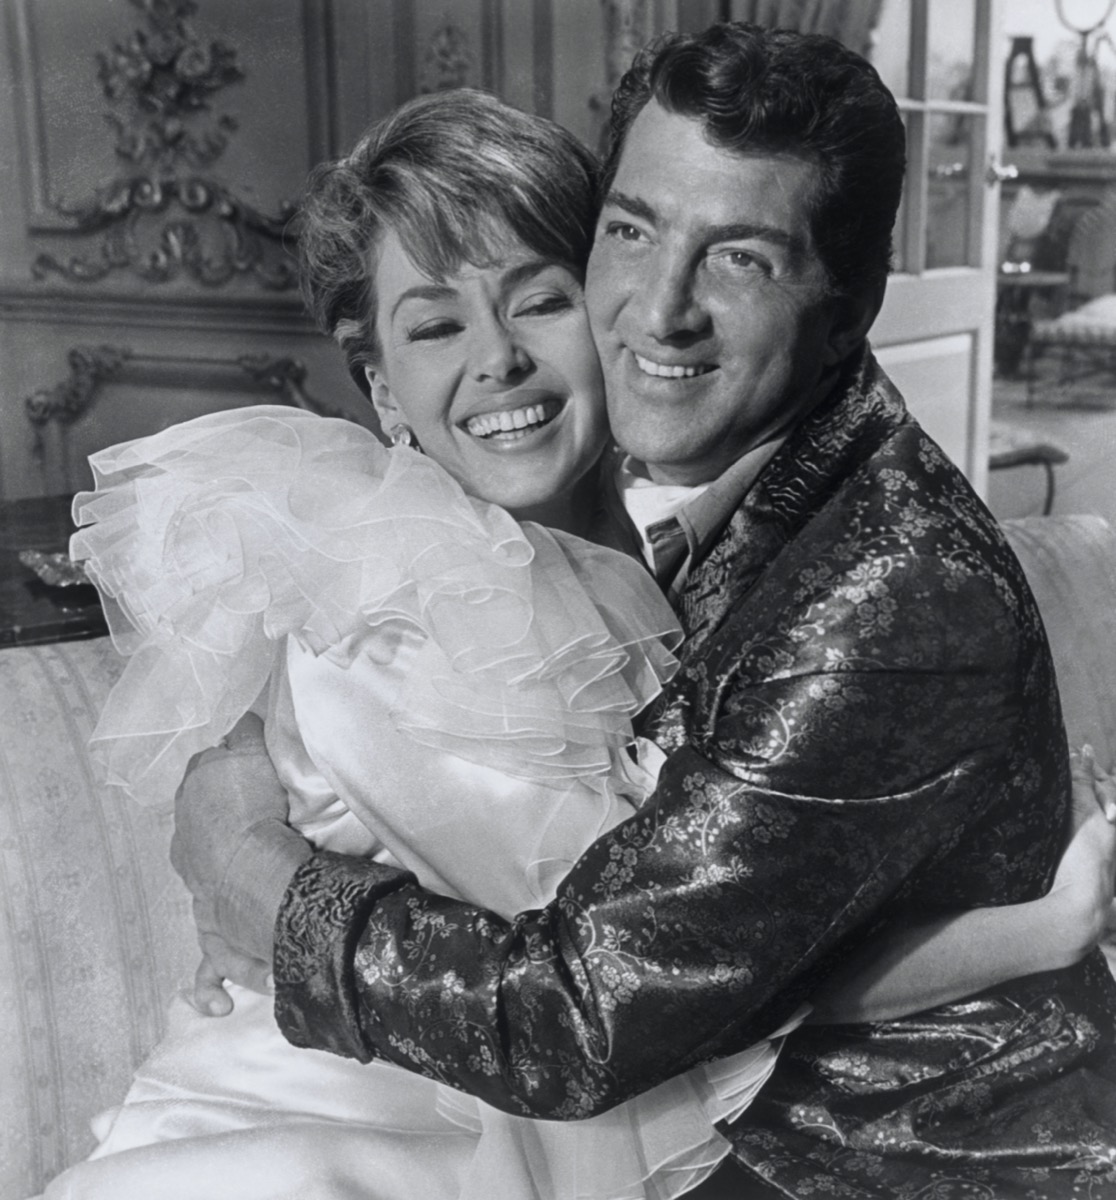 Barbara Rush and Dean Martin in "Robin and the 7 Hoods"